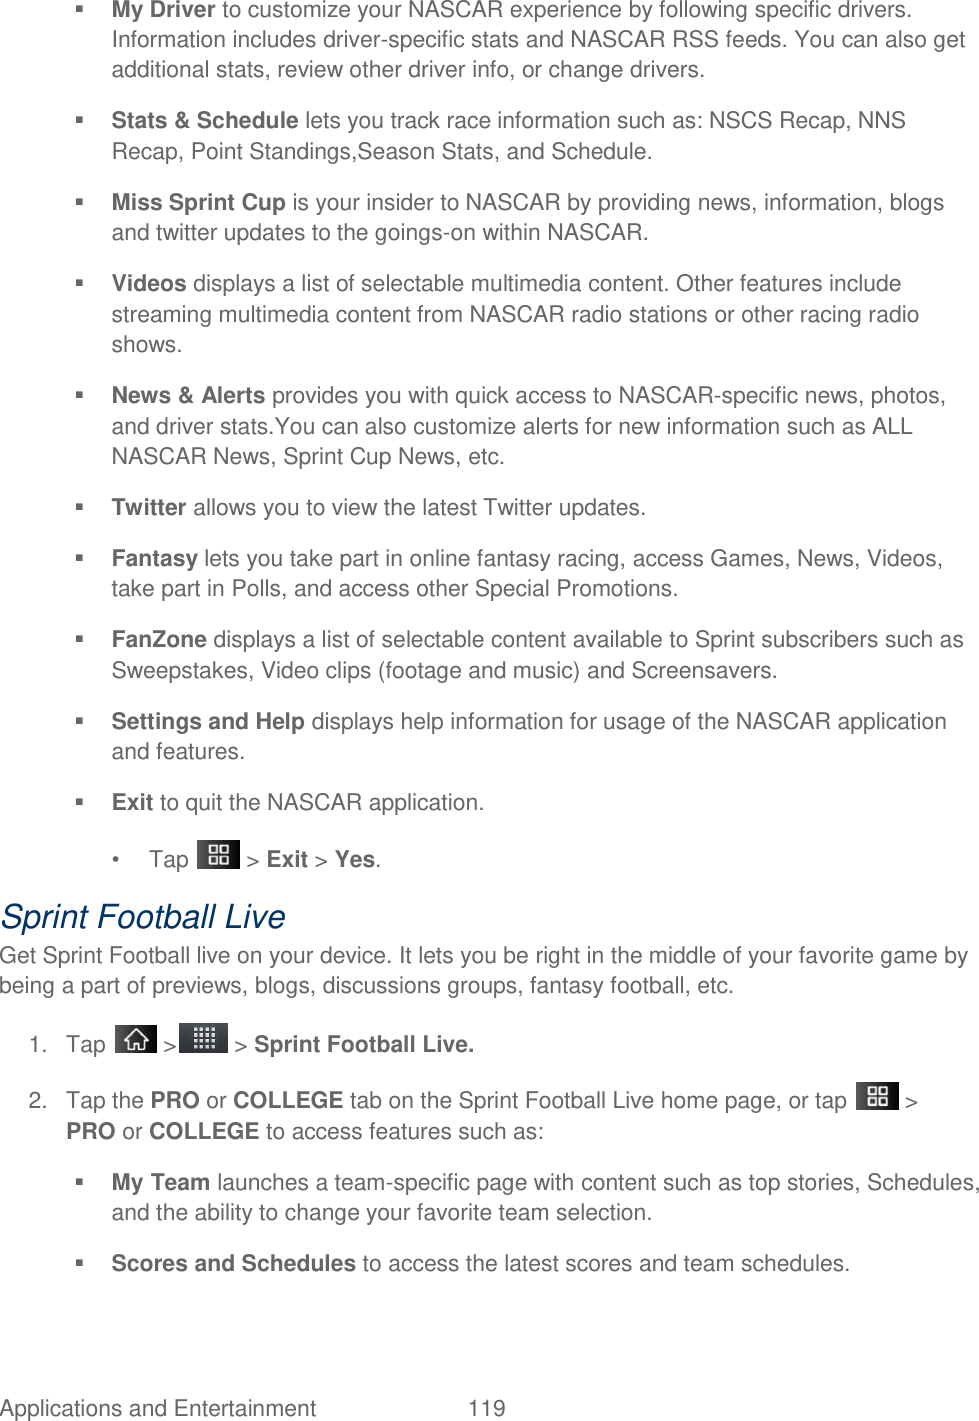 Applications and Entertainment  119  My Driver to customize your NASCAR experience by following specific drivers. Information includes driver-specific stats and NASCAR RSS feeds. You can also get additional stats, review other driver info, or change drivers.  Stats &amp; Schedule lets you track race information such as: NSCS Recap, NNS Recap, Point Standings,Season Stats, and Schedule.  Miss Sprint Cup is your insider to NASCAR by providing news, information, blogs and twitter updates to the goings-on within NASCAR.  Videos displays a list of selectable multimedia content. Other features include streaming multimedia content from NASCAR radio stations or other racing radio shows.  News &amp; Alerts provides you with quick access to NASCAR-specific news, photos, and driver stats.You can also customize alerts for new information such as ALL NASCAR News, Sprint Cup News, etc.  Twitter allows you to view the latest Twitter updates.  Fantasy lets you take part in online fantasy racing, access Games, News, Videos, take part in Polls, and access other Special Promotions.  FanZone displays a list of selectable content available to Sprint subscribers such as Sweepstakes, Video clips (footage and music) and Screensavers.  Settings and Help displays help information for usage of the NASCAR application and features.  Exit to quit the NASCAR application. •  Tap   &gt; Exit &gt; Yes. Sprint Football Live Get Sprint Football live on your device. It lets you be right in the middle of your favorite game by being a part of previews, blogs, discussions groups, fantasy football, etc. 1.  Tap   &gt;  &gt; Sprint Football Live. 2.  Tap the PRO or COLLEGE tab on the Sprint Football Live home page, or tap   &gt; PRO or COLLEGE to access features such as:  My Team launches a team-specific page with content such as top stories, Schedules, and the ability to change your favorite team selection.  Scores and Schedules to access the latest scores and team schedules. 